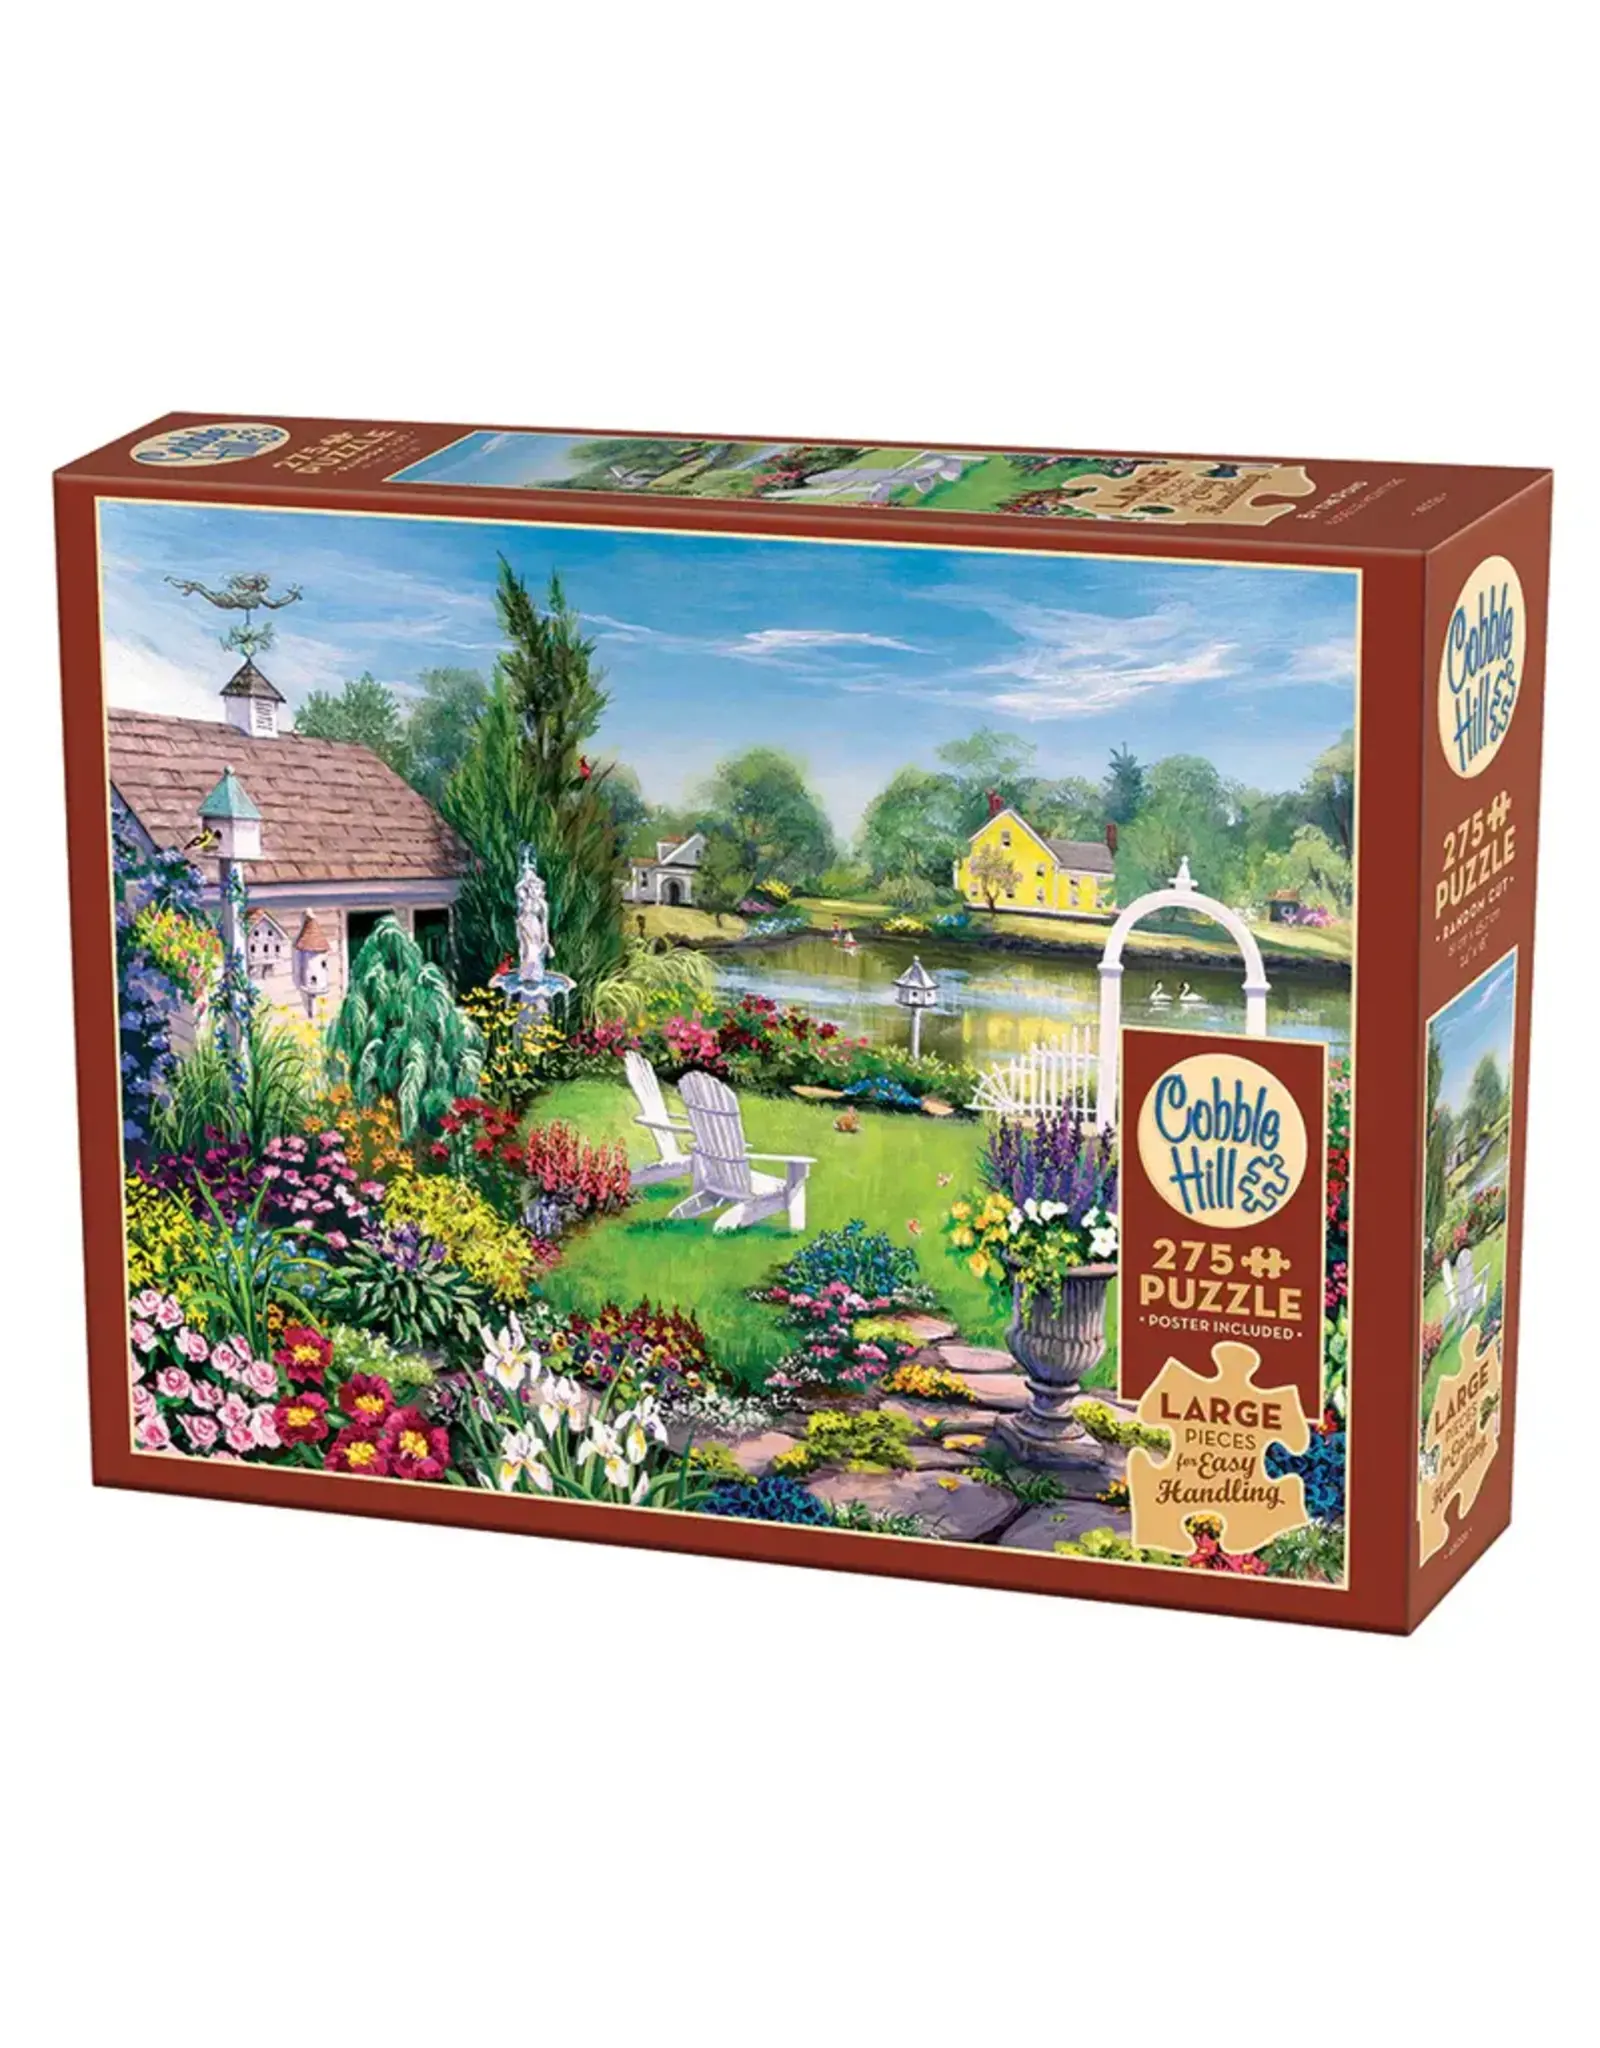 Cobble Hill By the Pond 275 Piece Puzzle